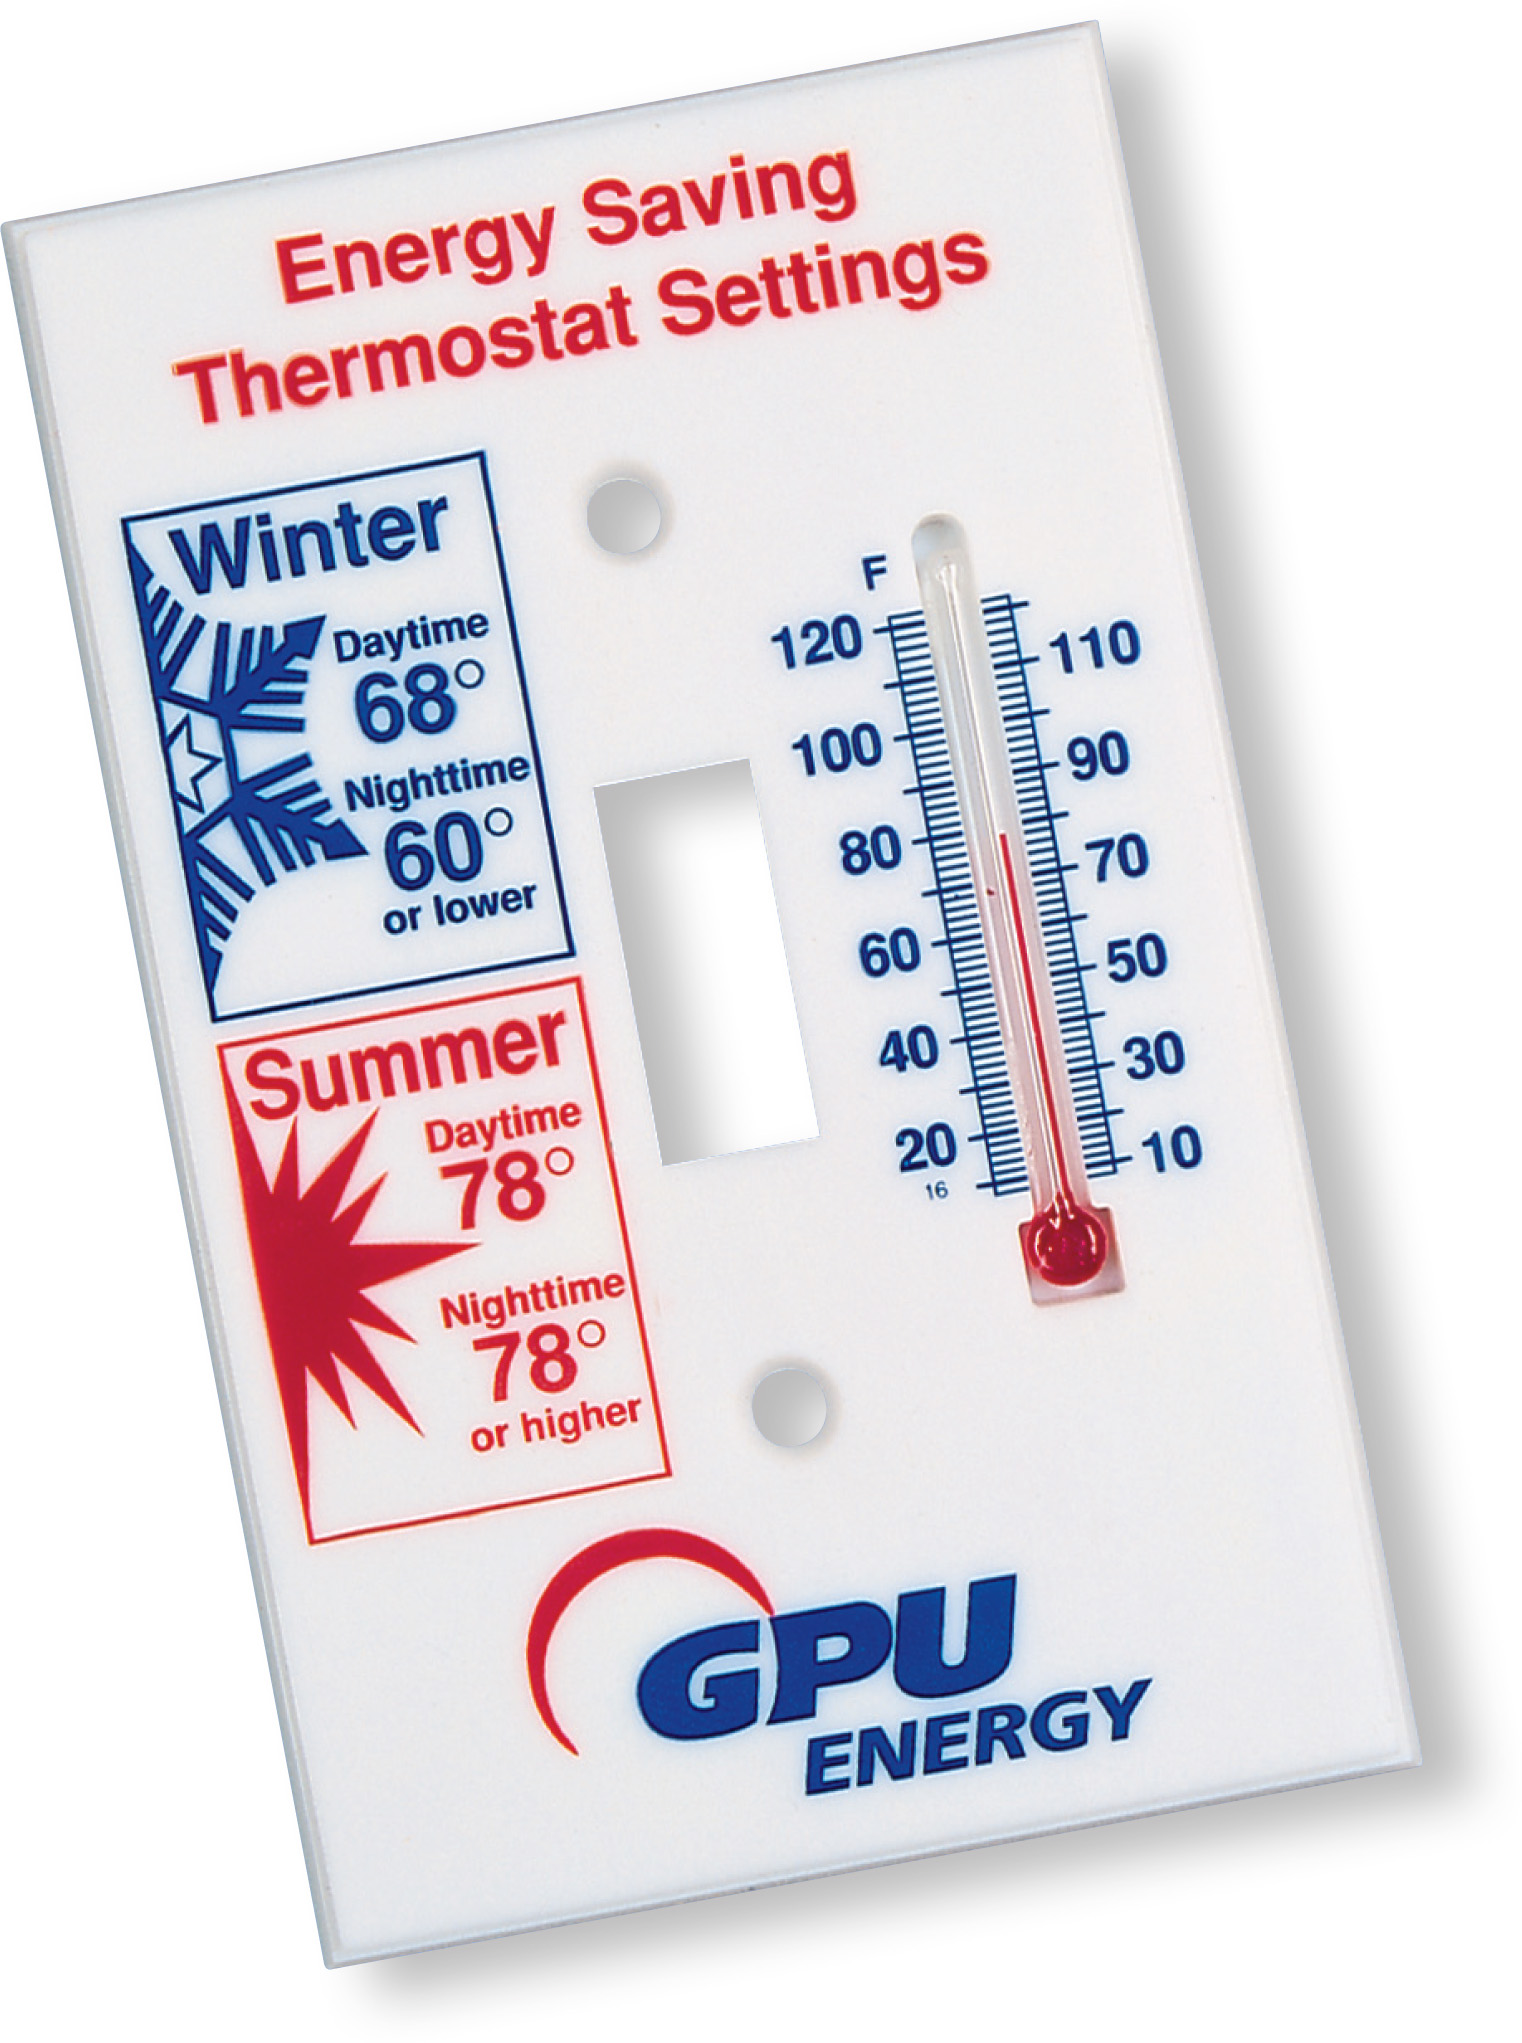 Integral thermometers are part of the custom picture with switch plates from Blueberry Brands.